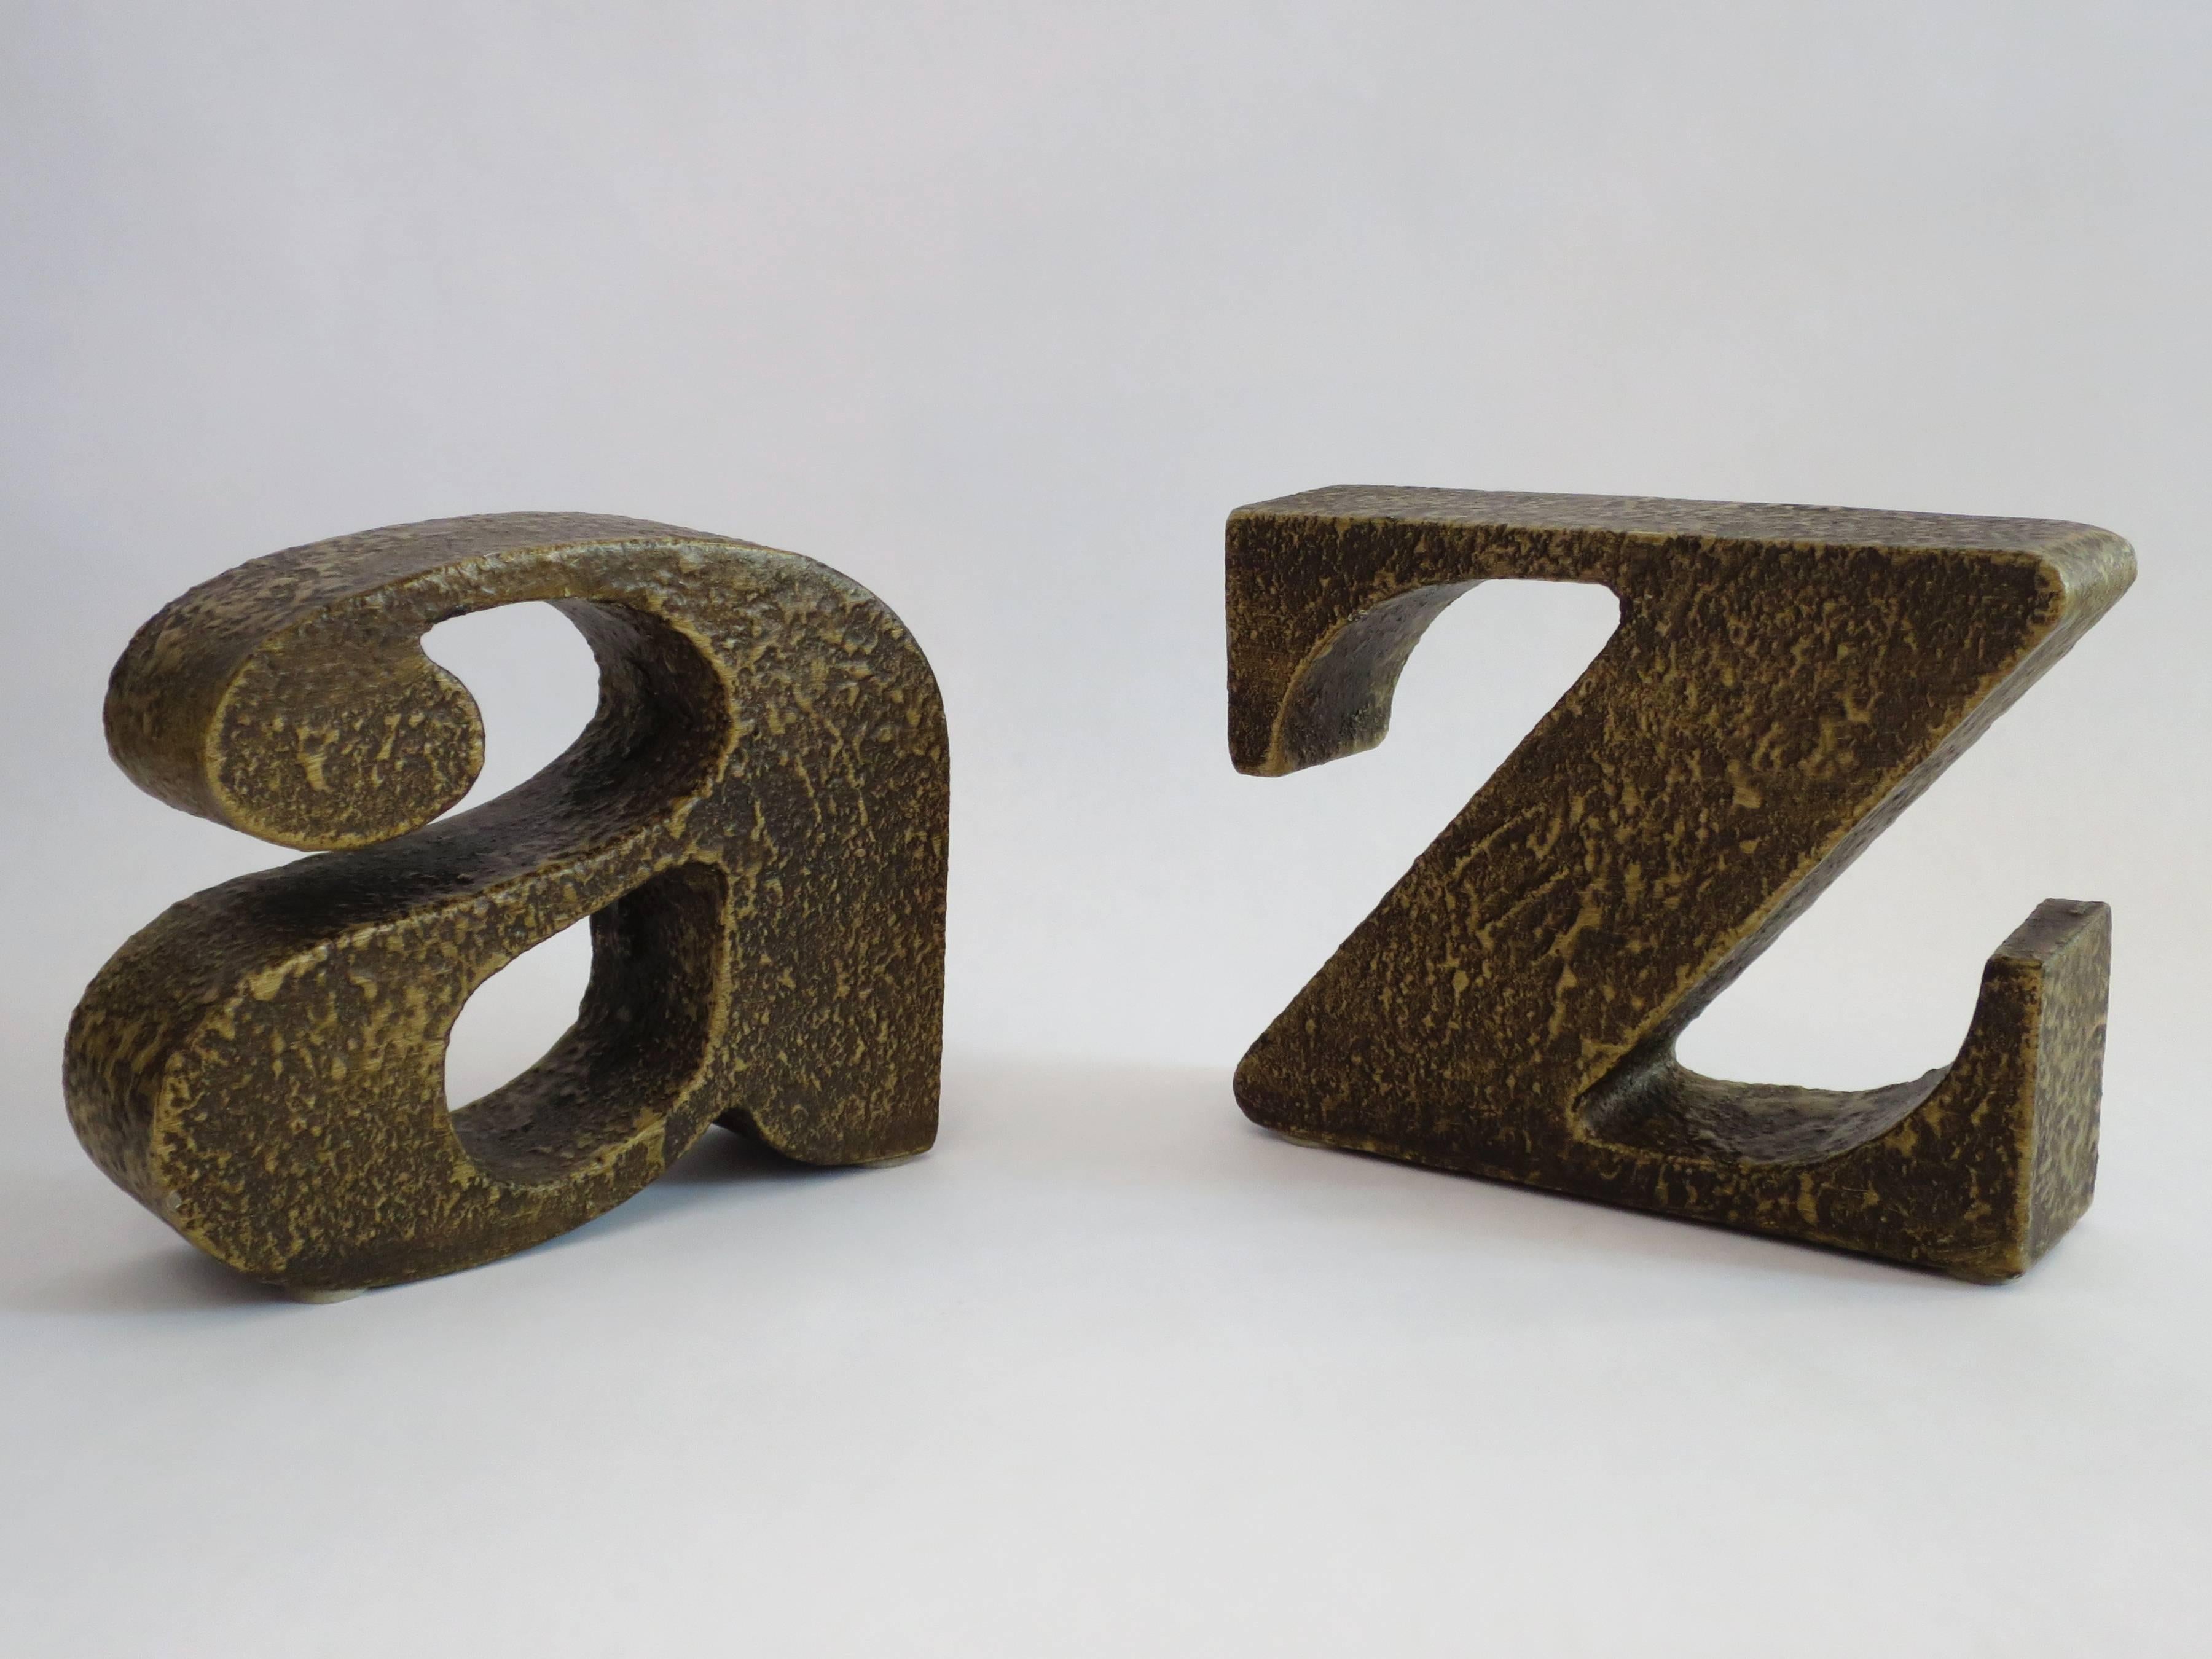 Curtis Jere A to Z bookends. Very nice vintage condition, circa 1970s. Complementary shipping in the lower 48.